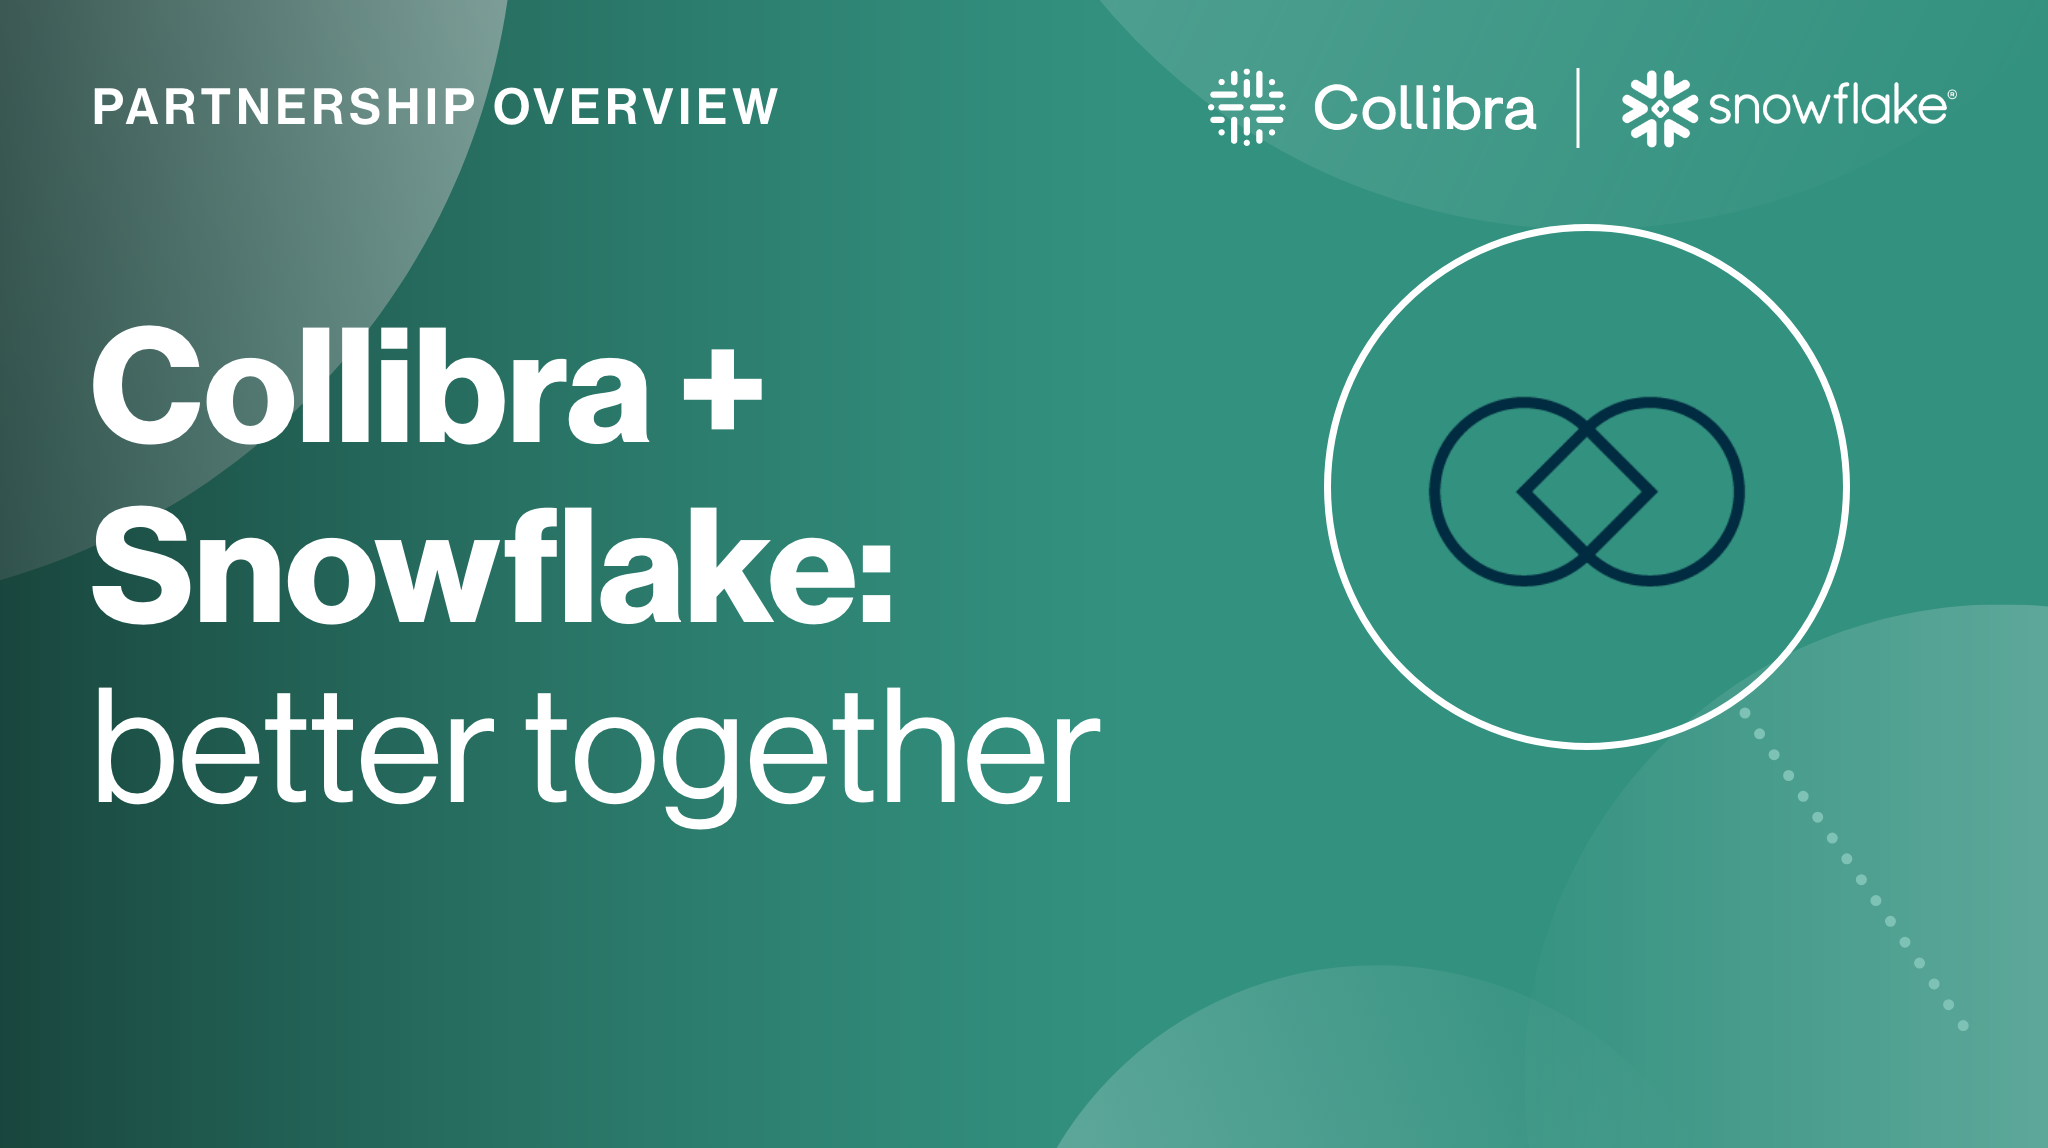 Load video: Collibra + Snowflake: better together